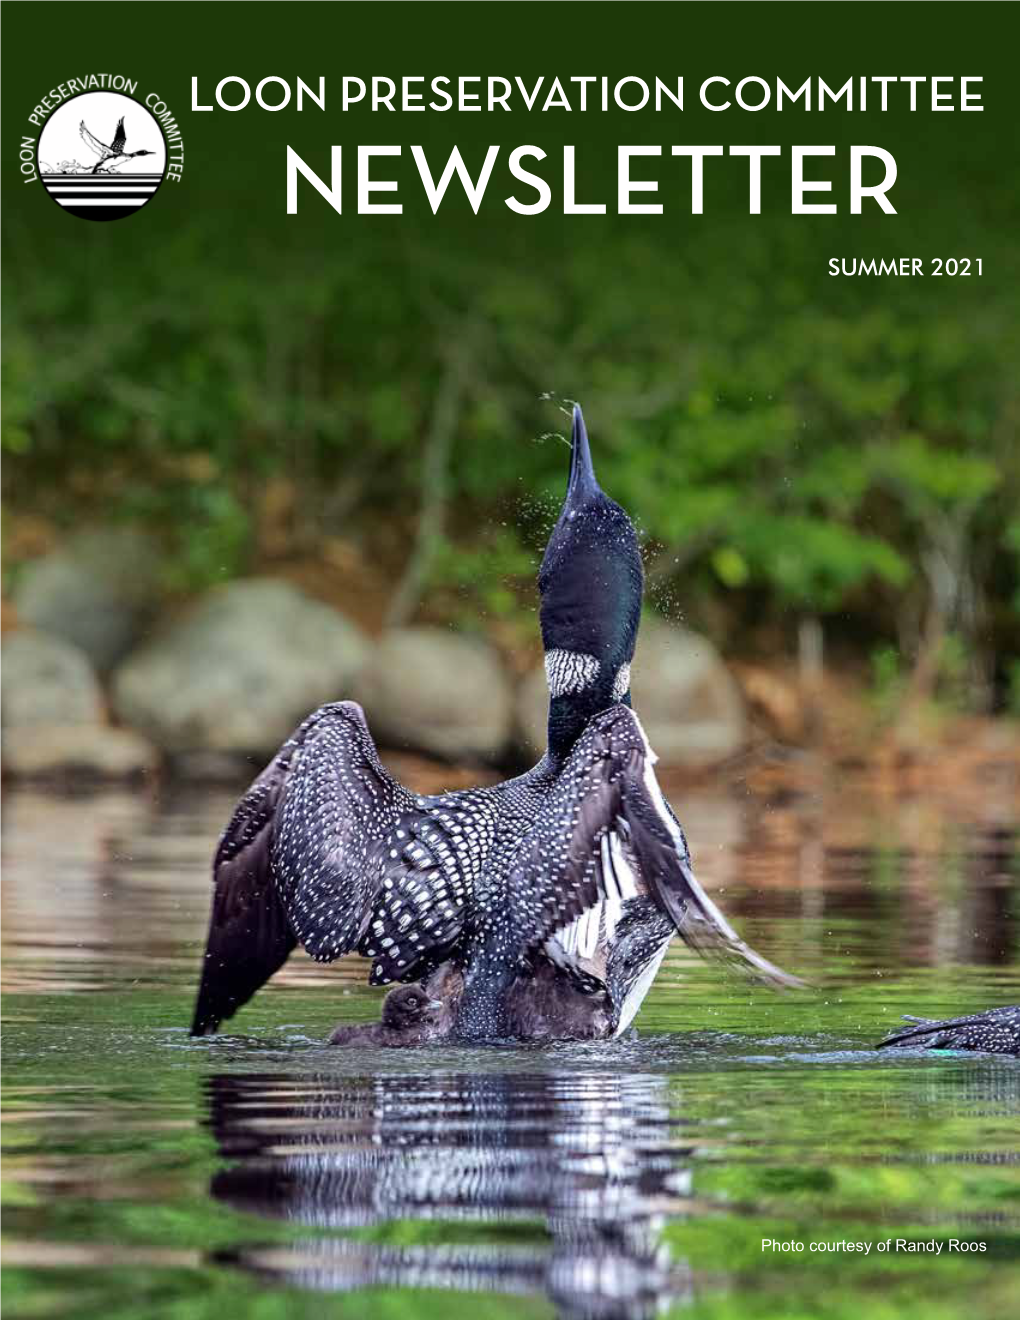 Loon Preservation Committee Newsletter Summer 2021